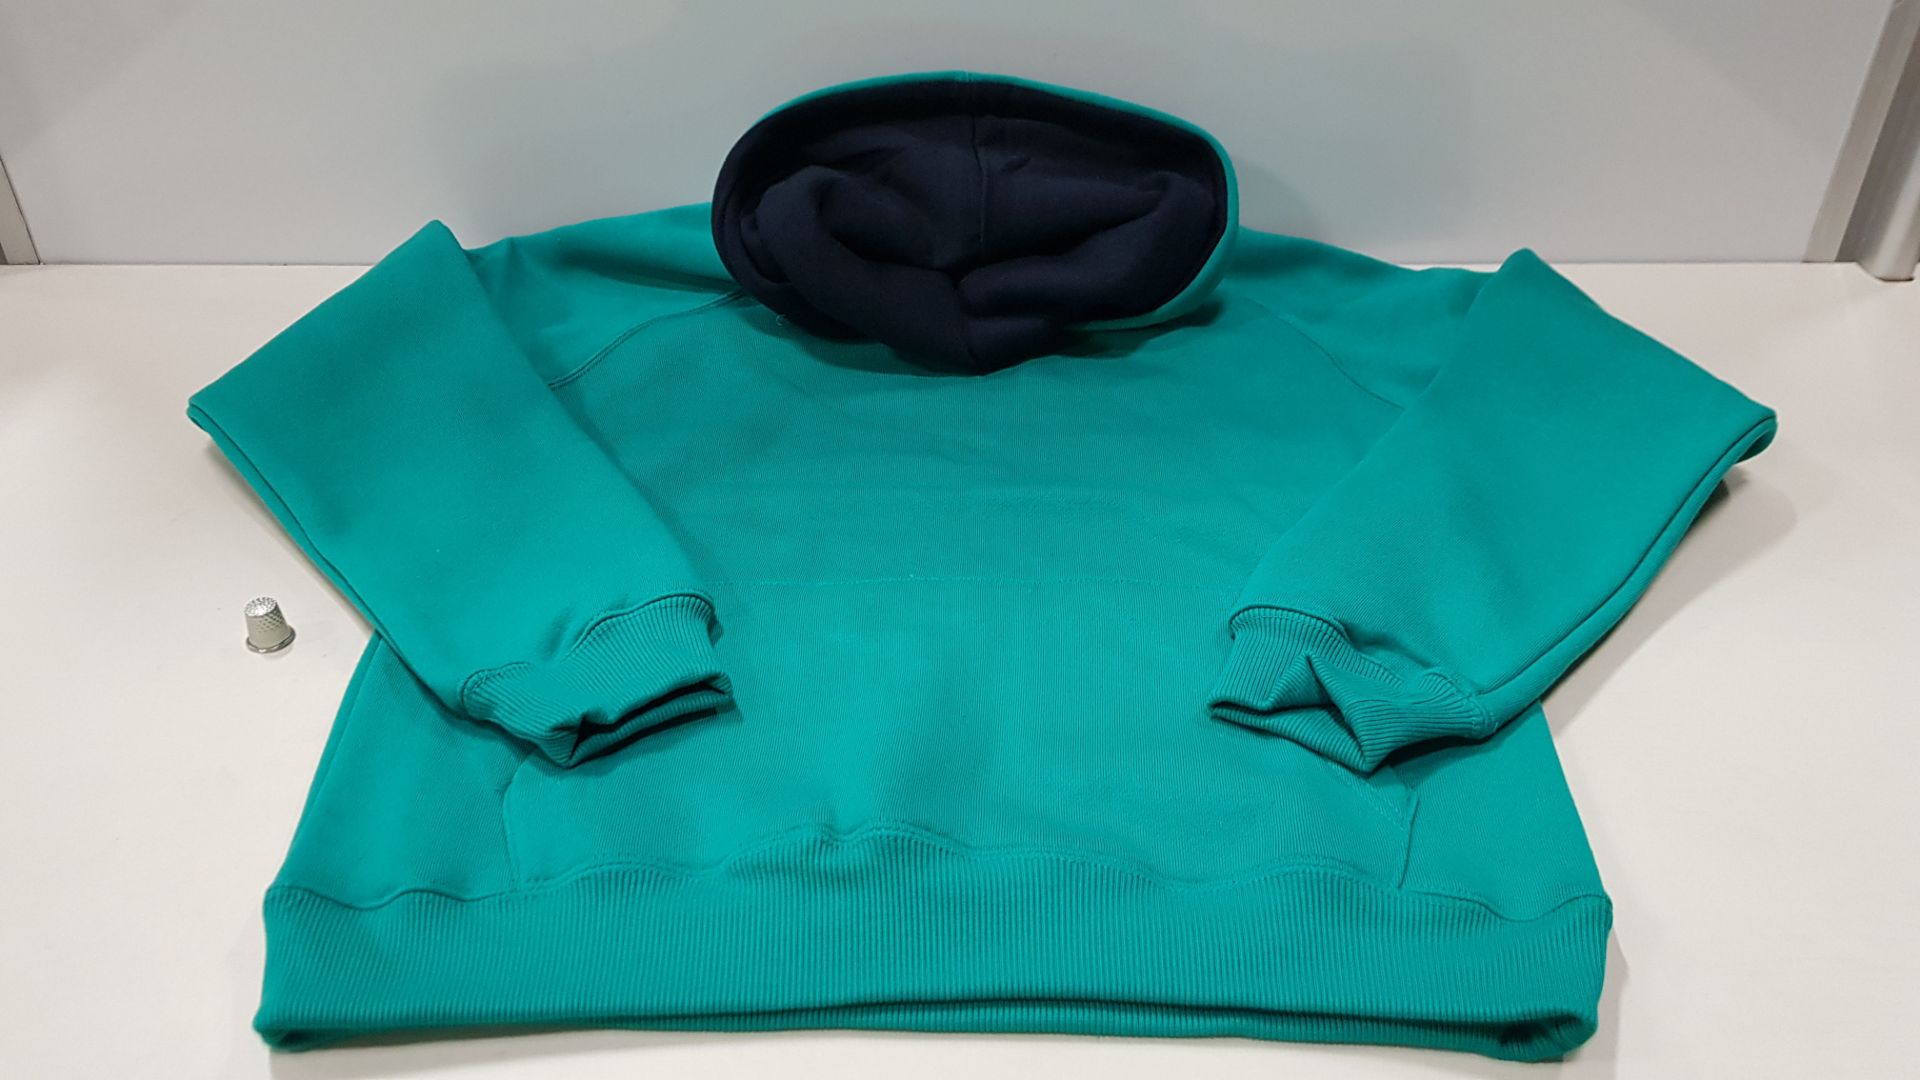 15 X BRAND NEW PAPINI TEAL/NAVY HOODIES - SIZED 11-12 YEARS